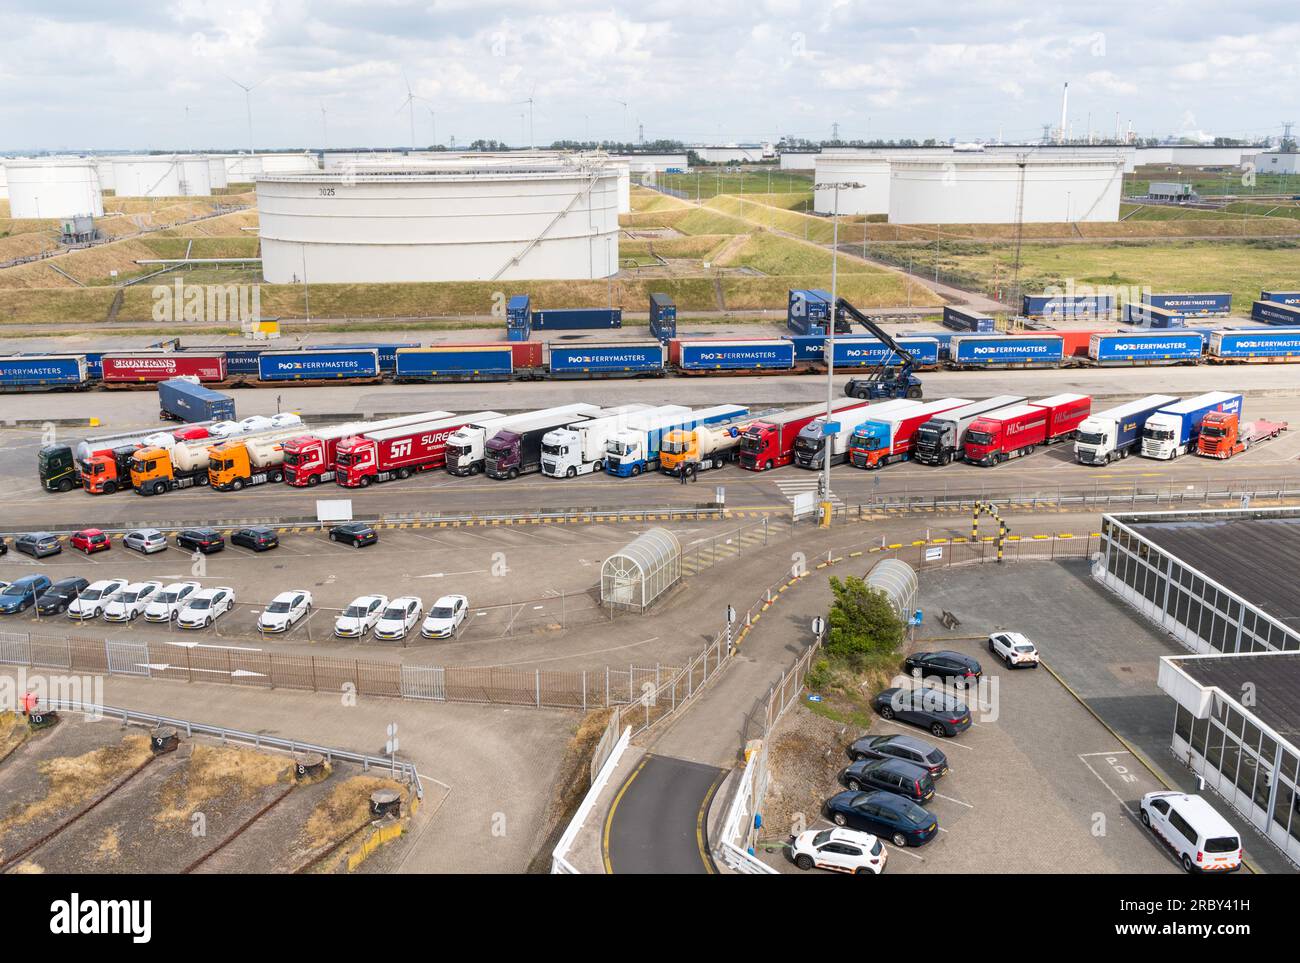 A row of trucks waiting to board a ferry to the UK in the port of Rotterdam, Holland, Europe Stock Photo